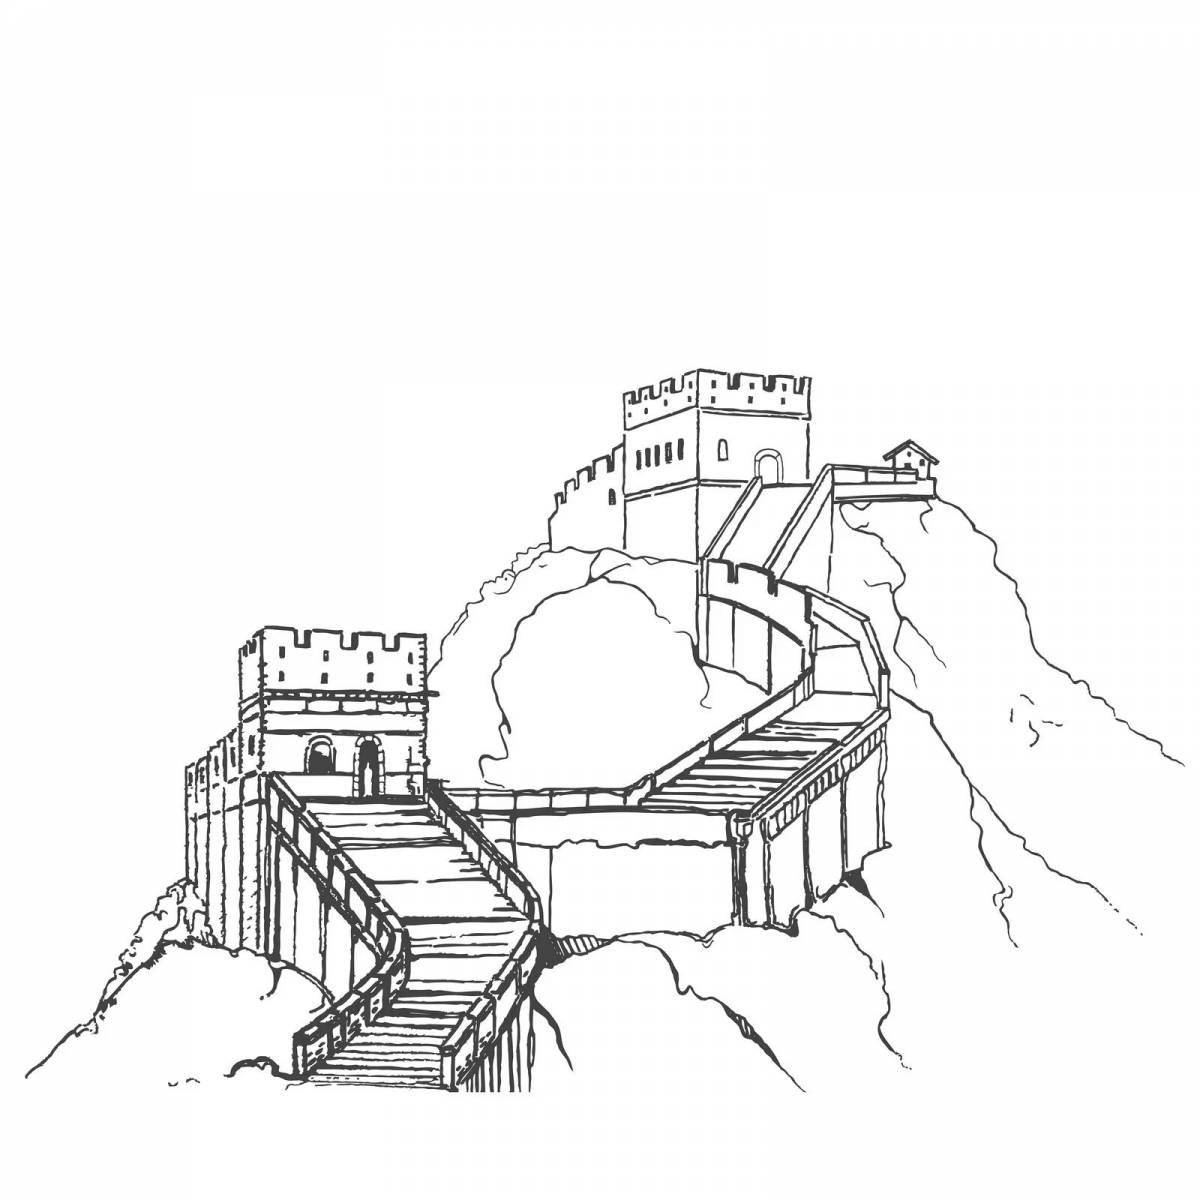 Impressive great wall of china coloring book